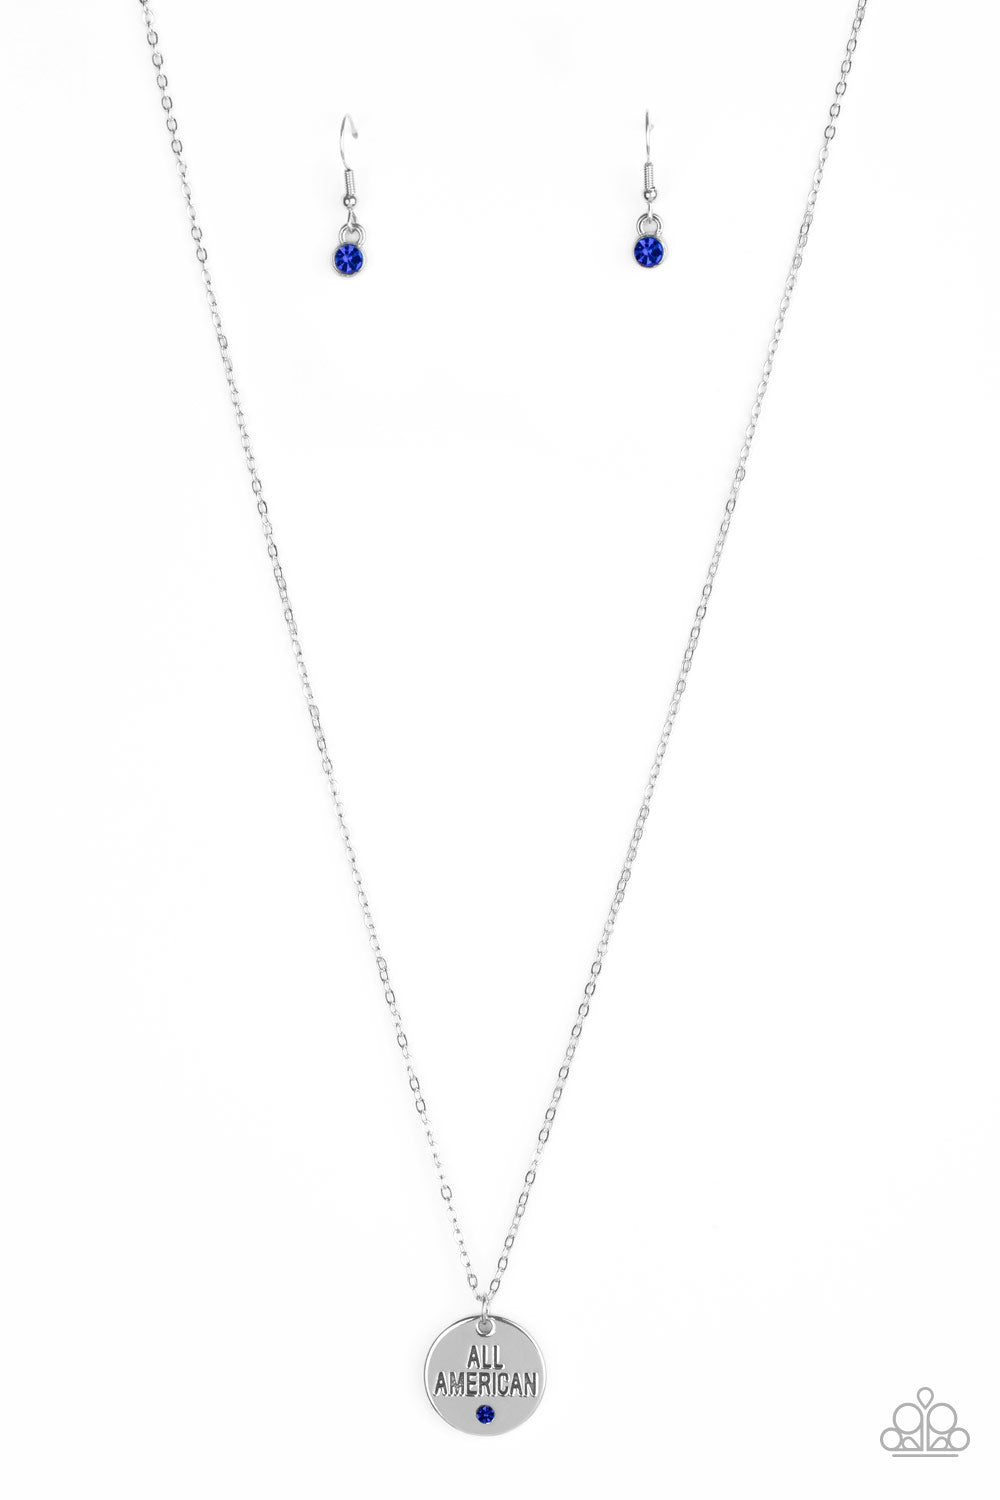 All American, All The Time - Blue Necklace Set